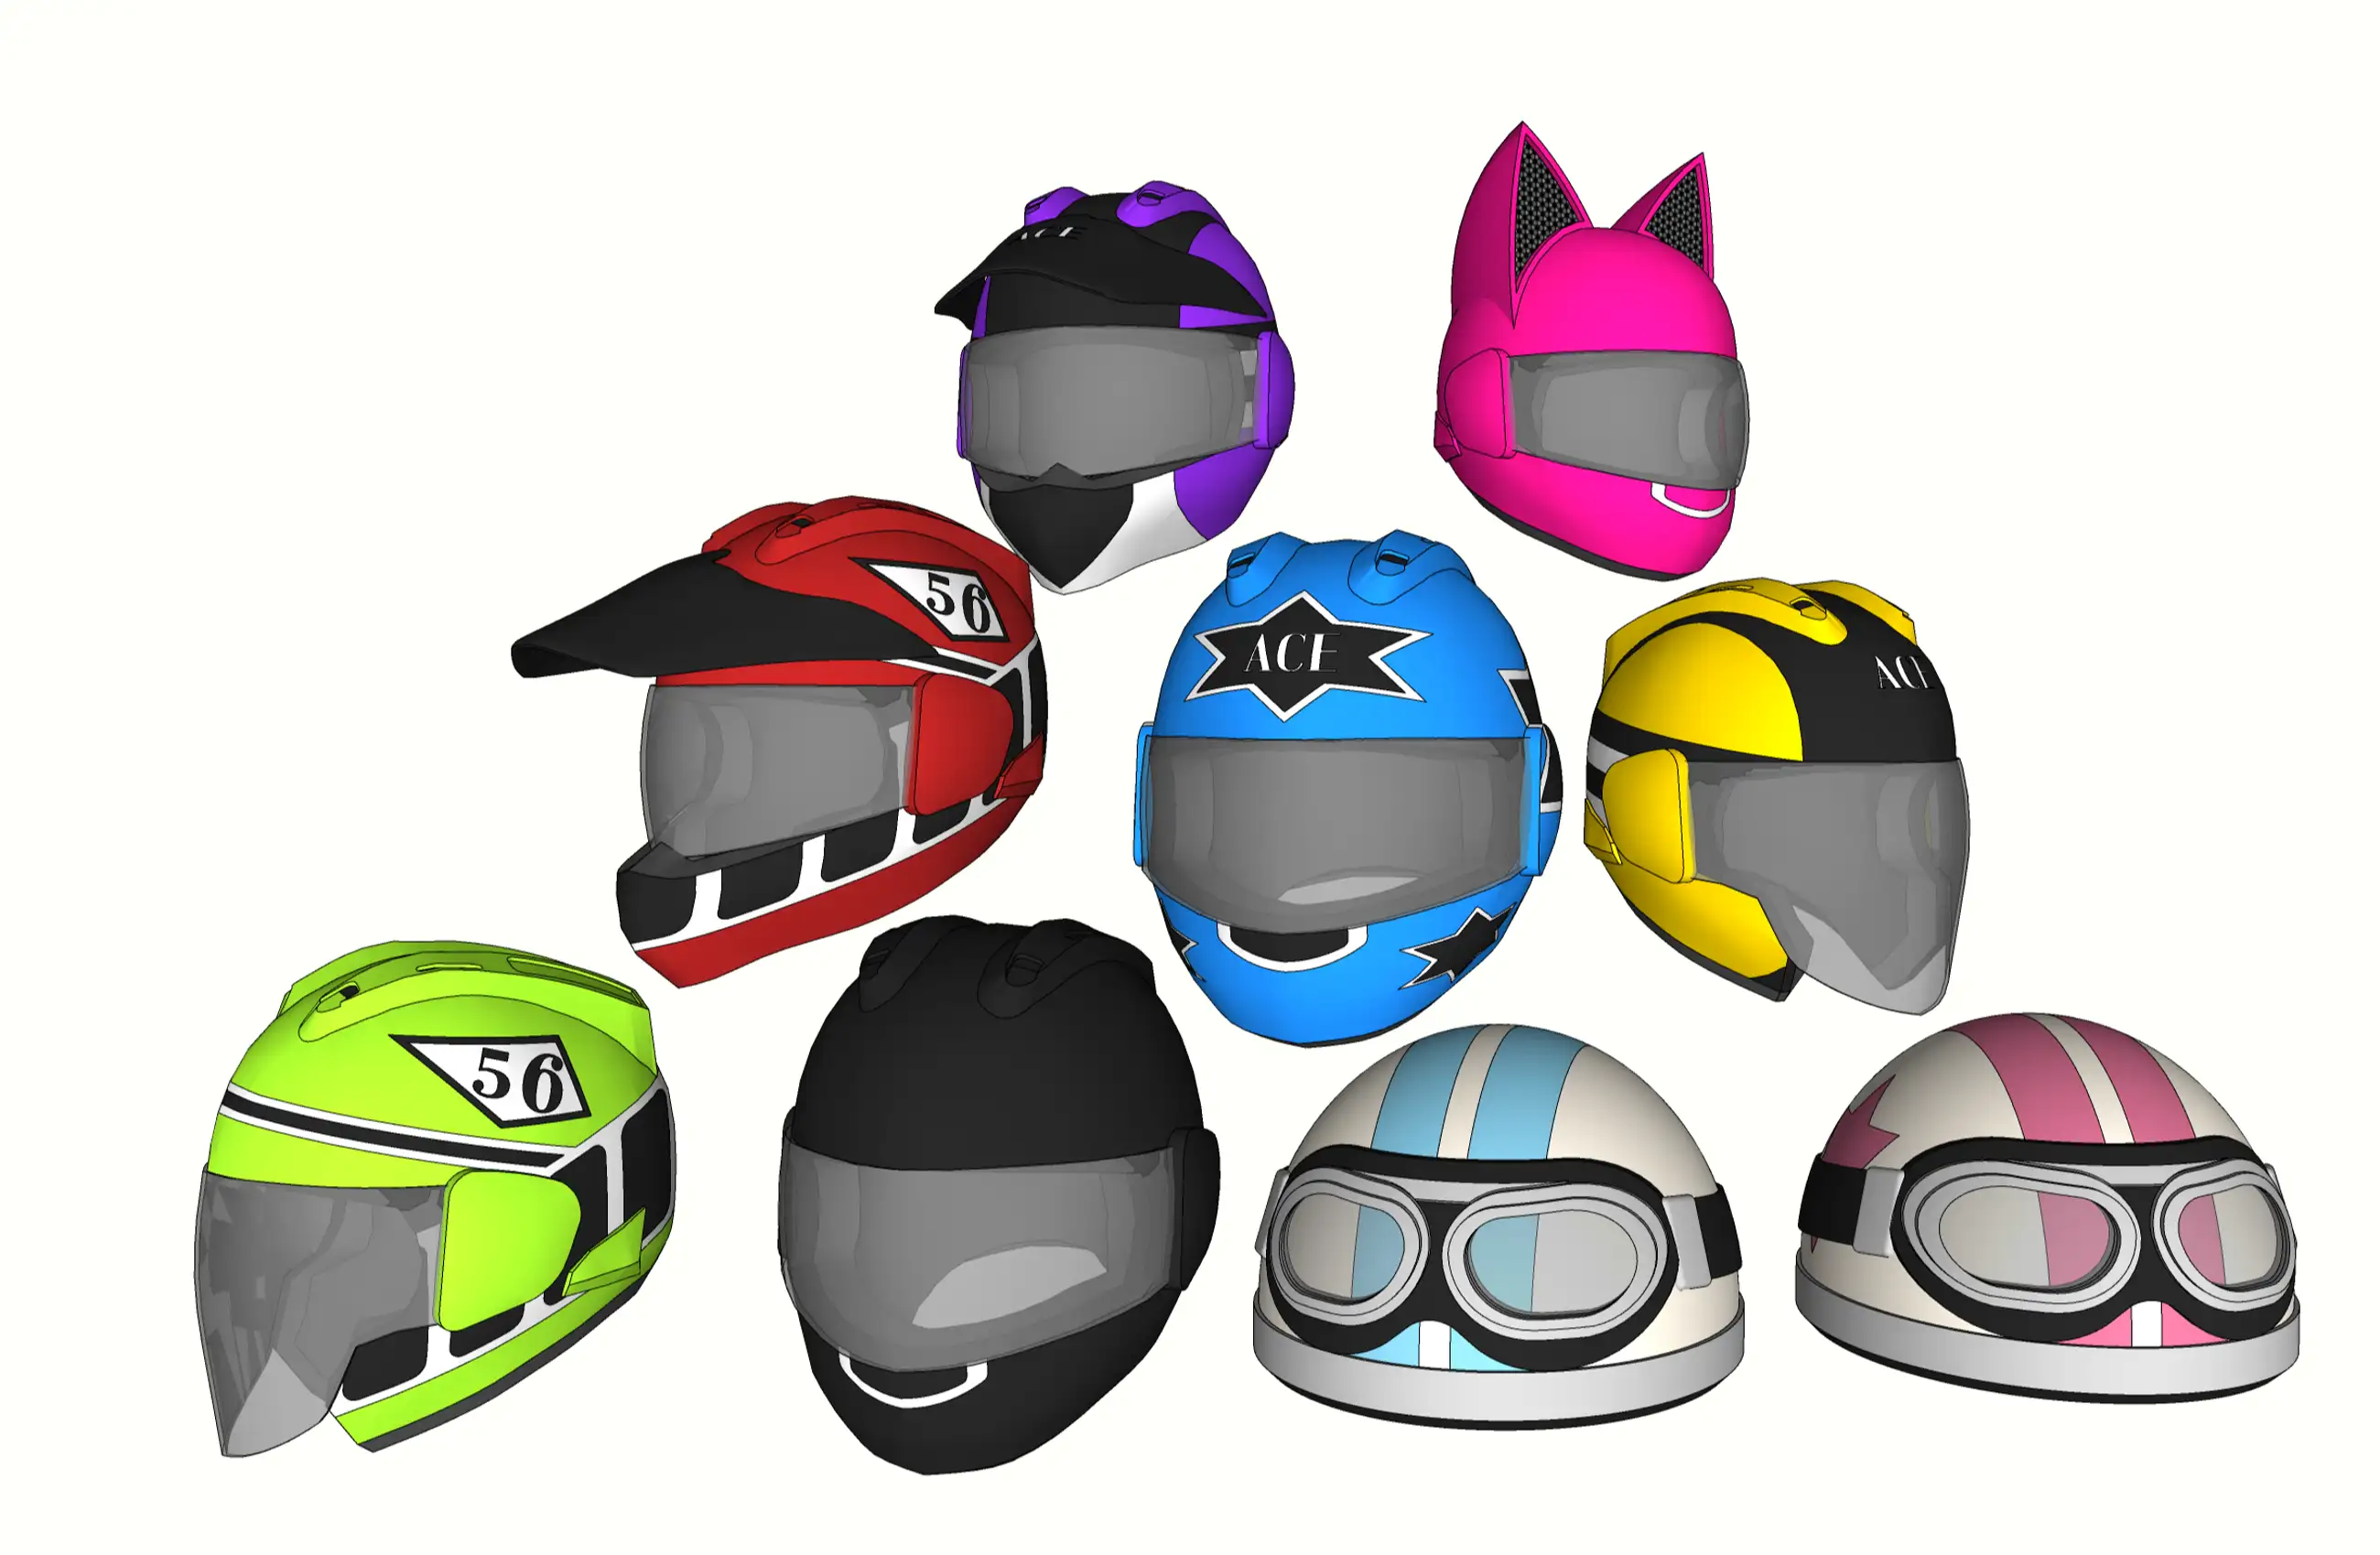 5 collection of motorcycle helmets (full face, half face, off-road, semi-mo, cat ears)